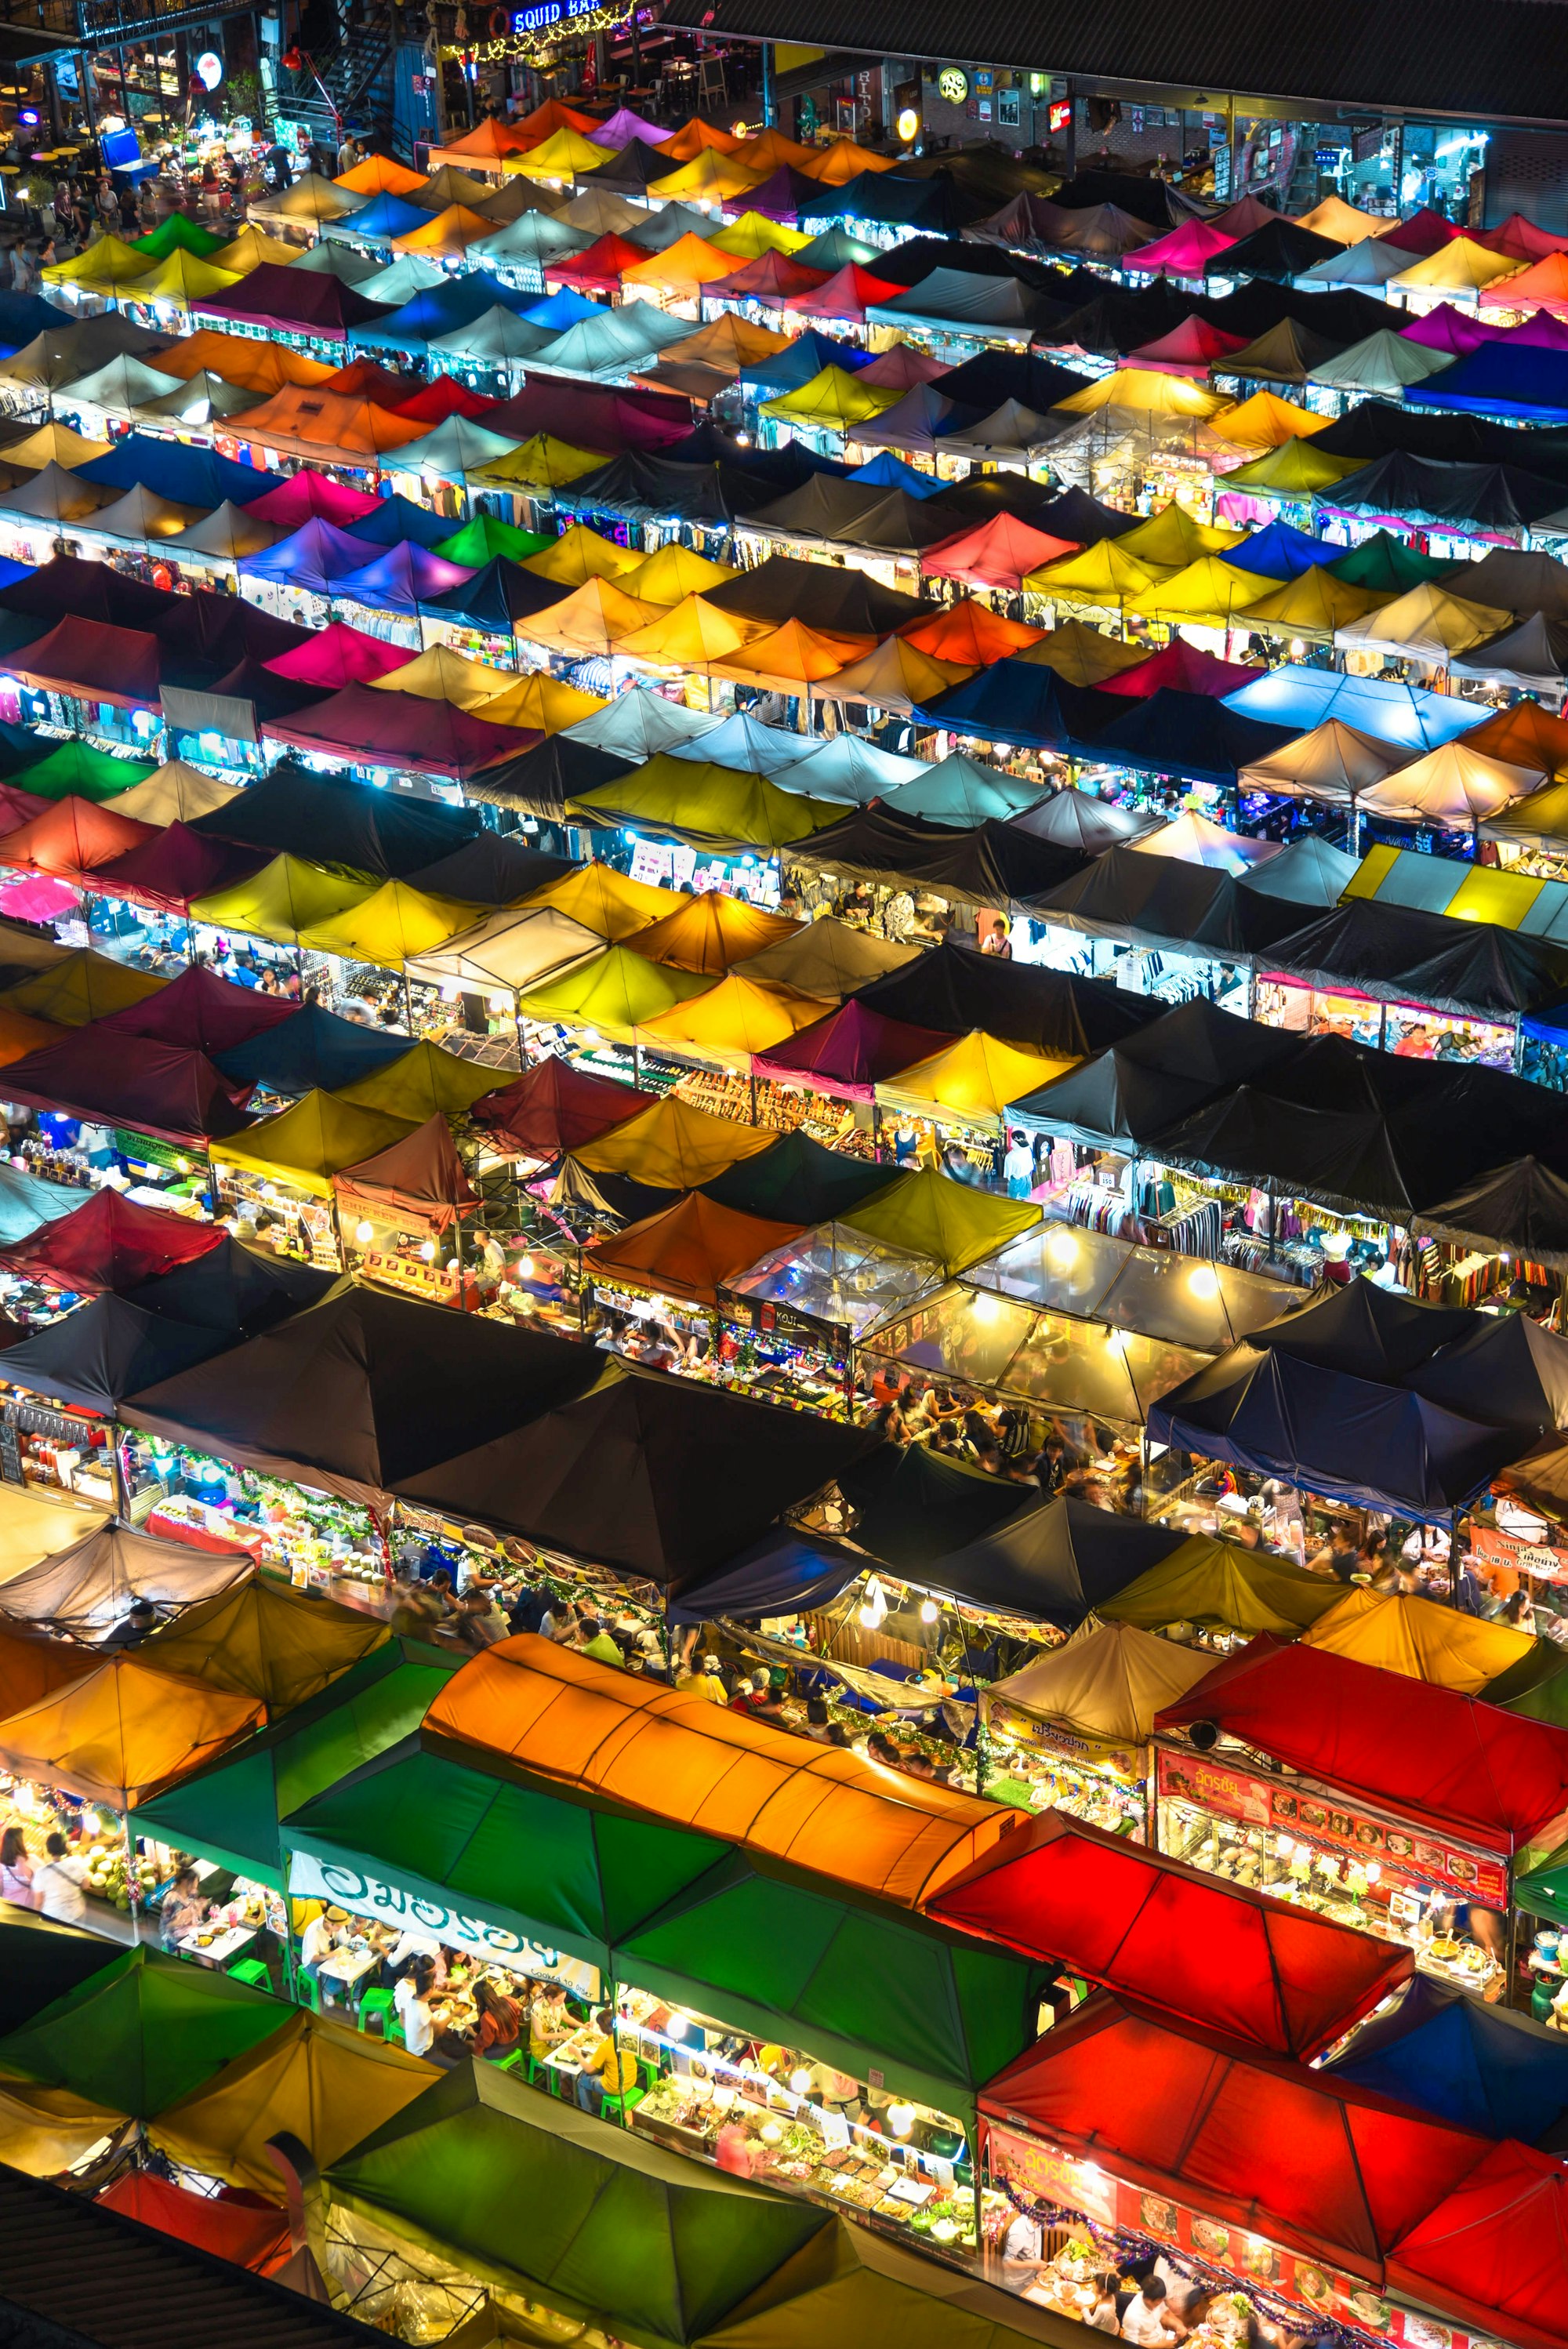 Every weekend in Bangkok this large night market takes place outside of the world mall. From the fourth floor of the mall parking garage, we were able to get a stunning vantage point of the market below. We could even feel the spices as we breathed in the air from above.